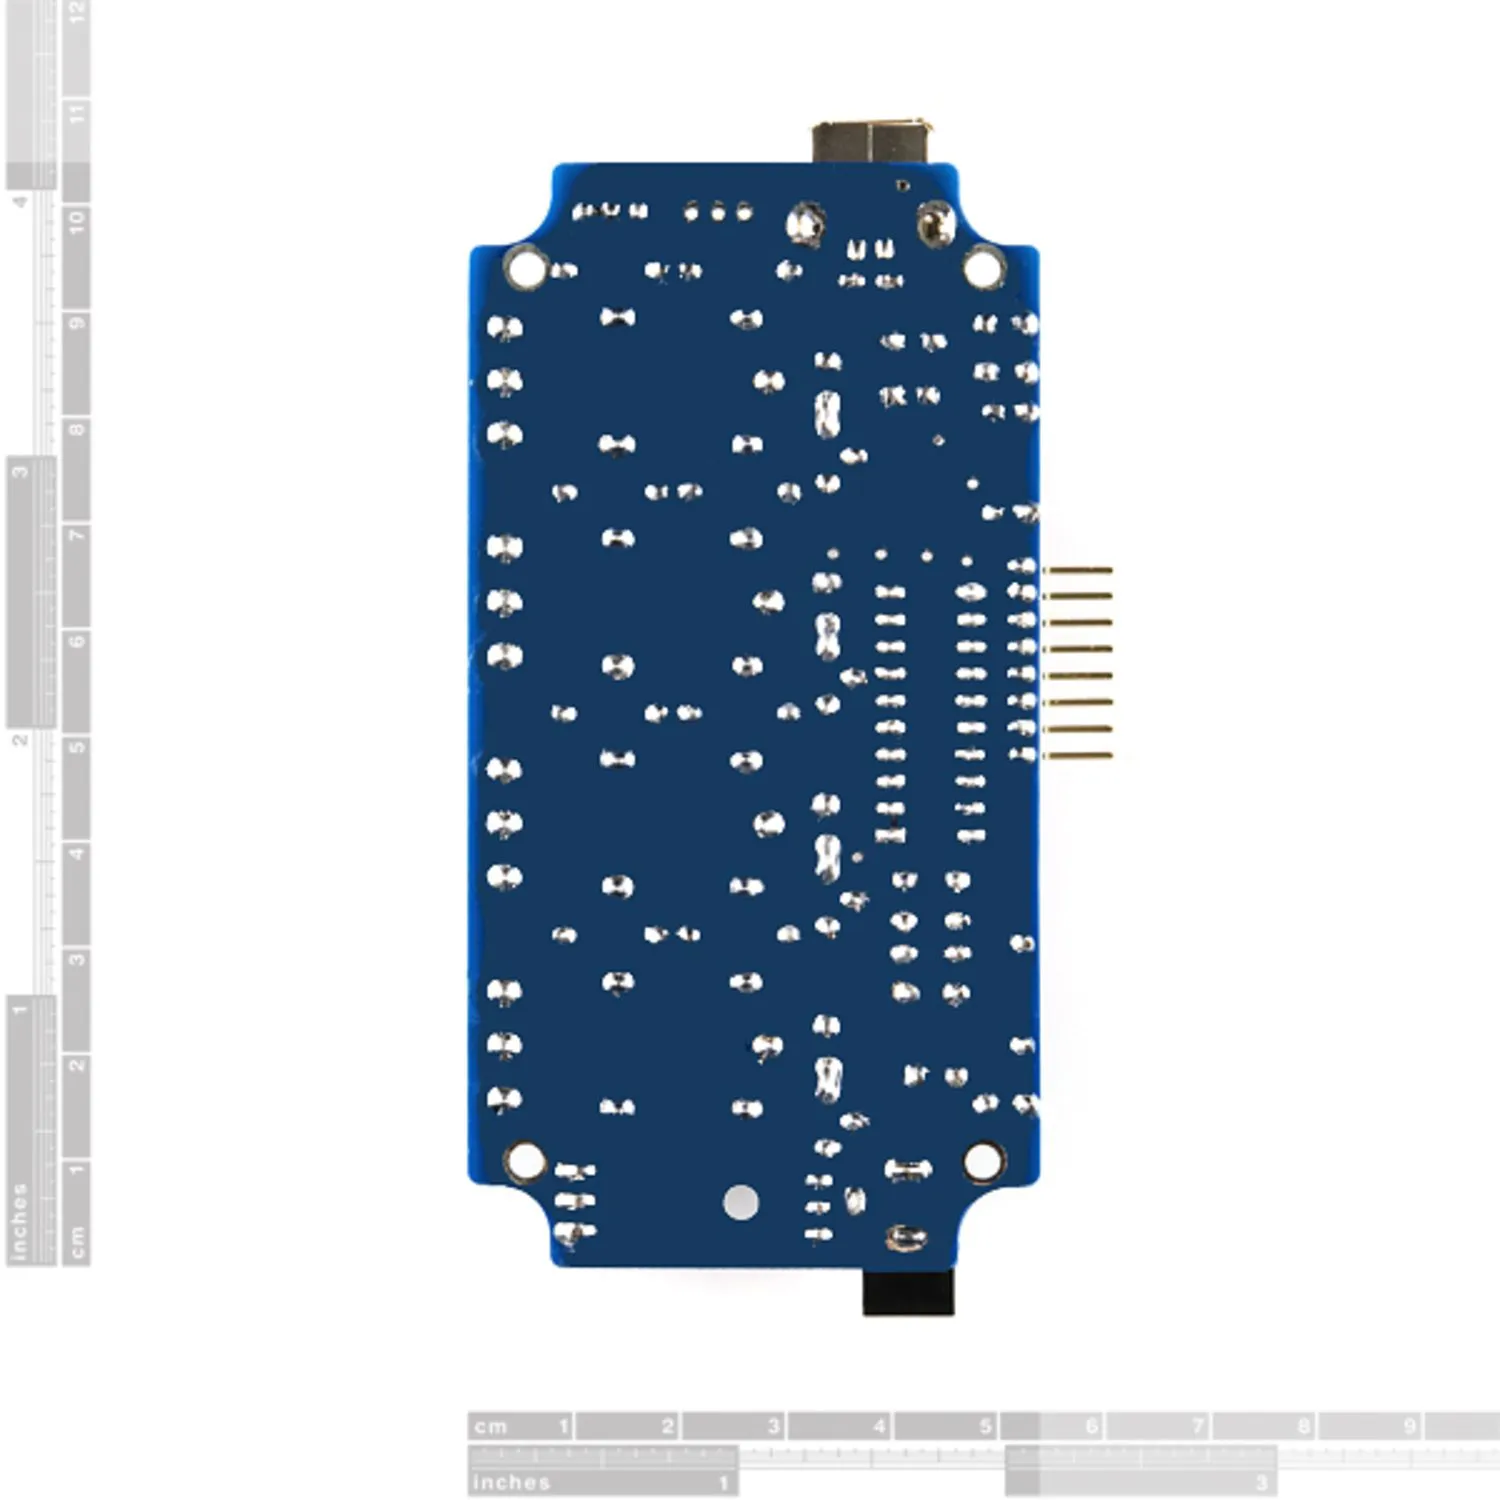 Photo of USB Relay Controller with 6-Channel I/O